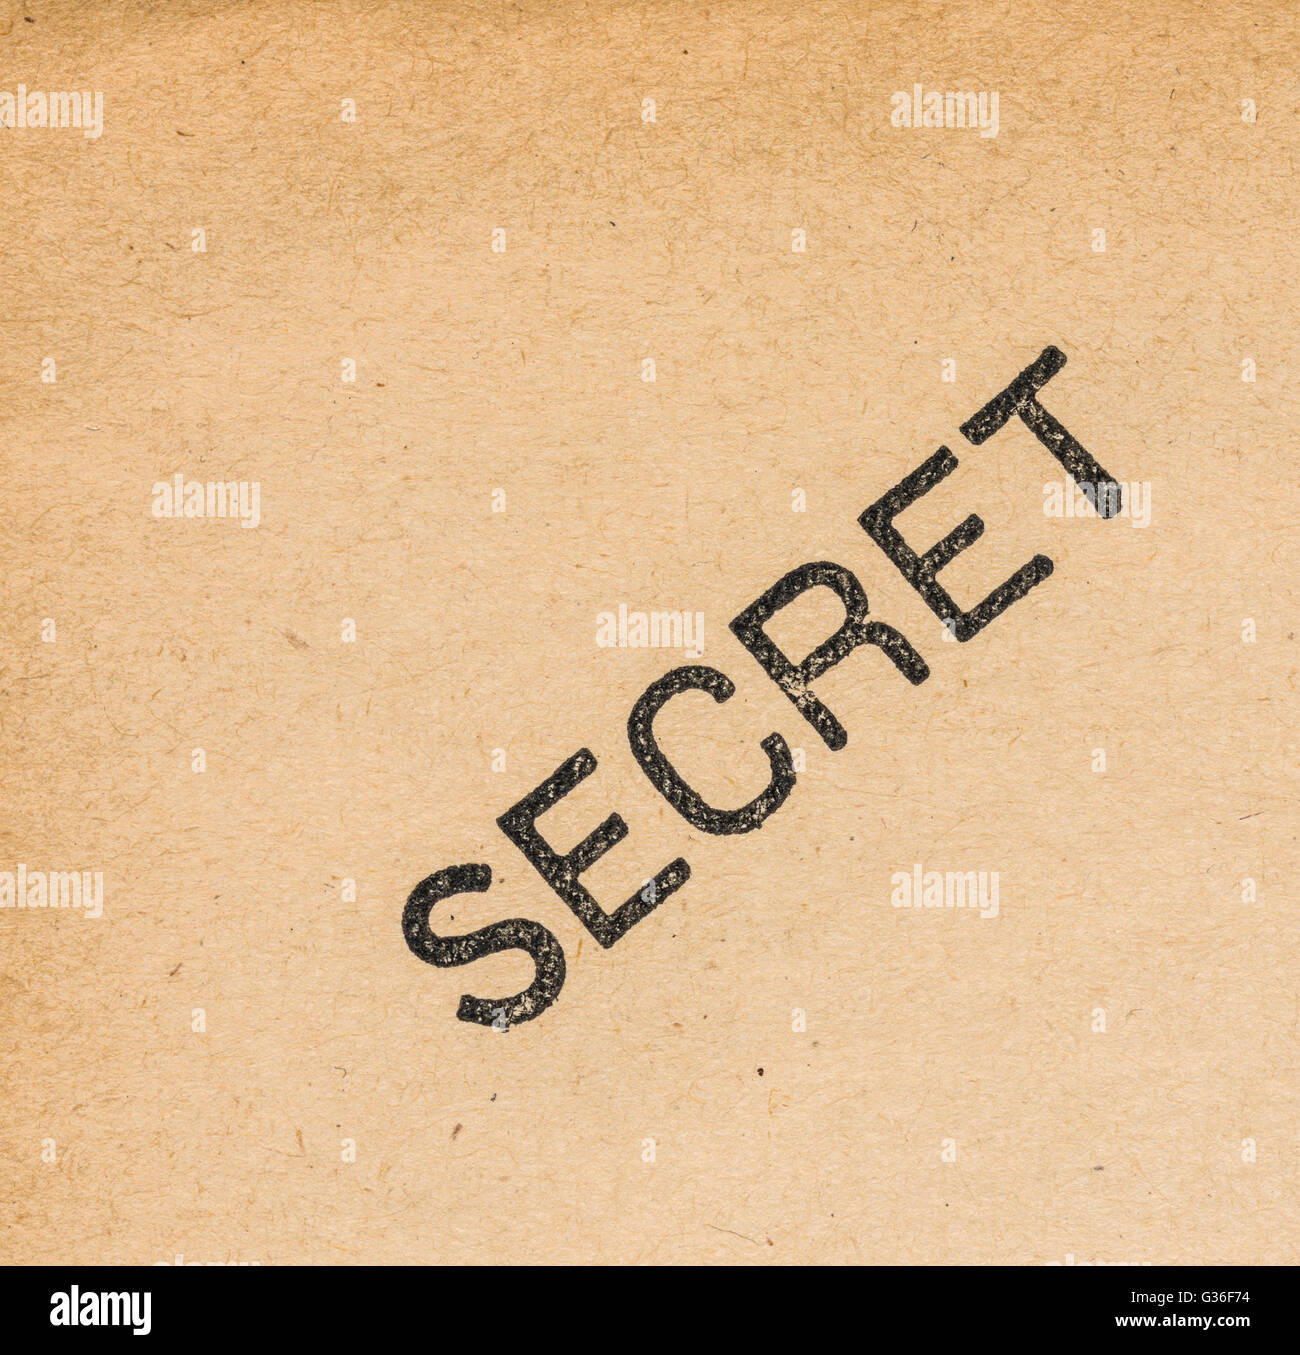 the word Secret printed on a yellowed old paper sheet Stock Photo